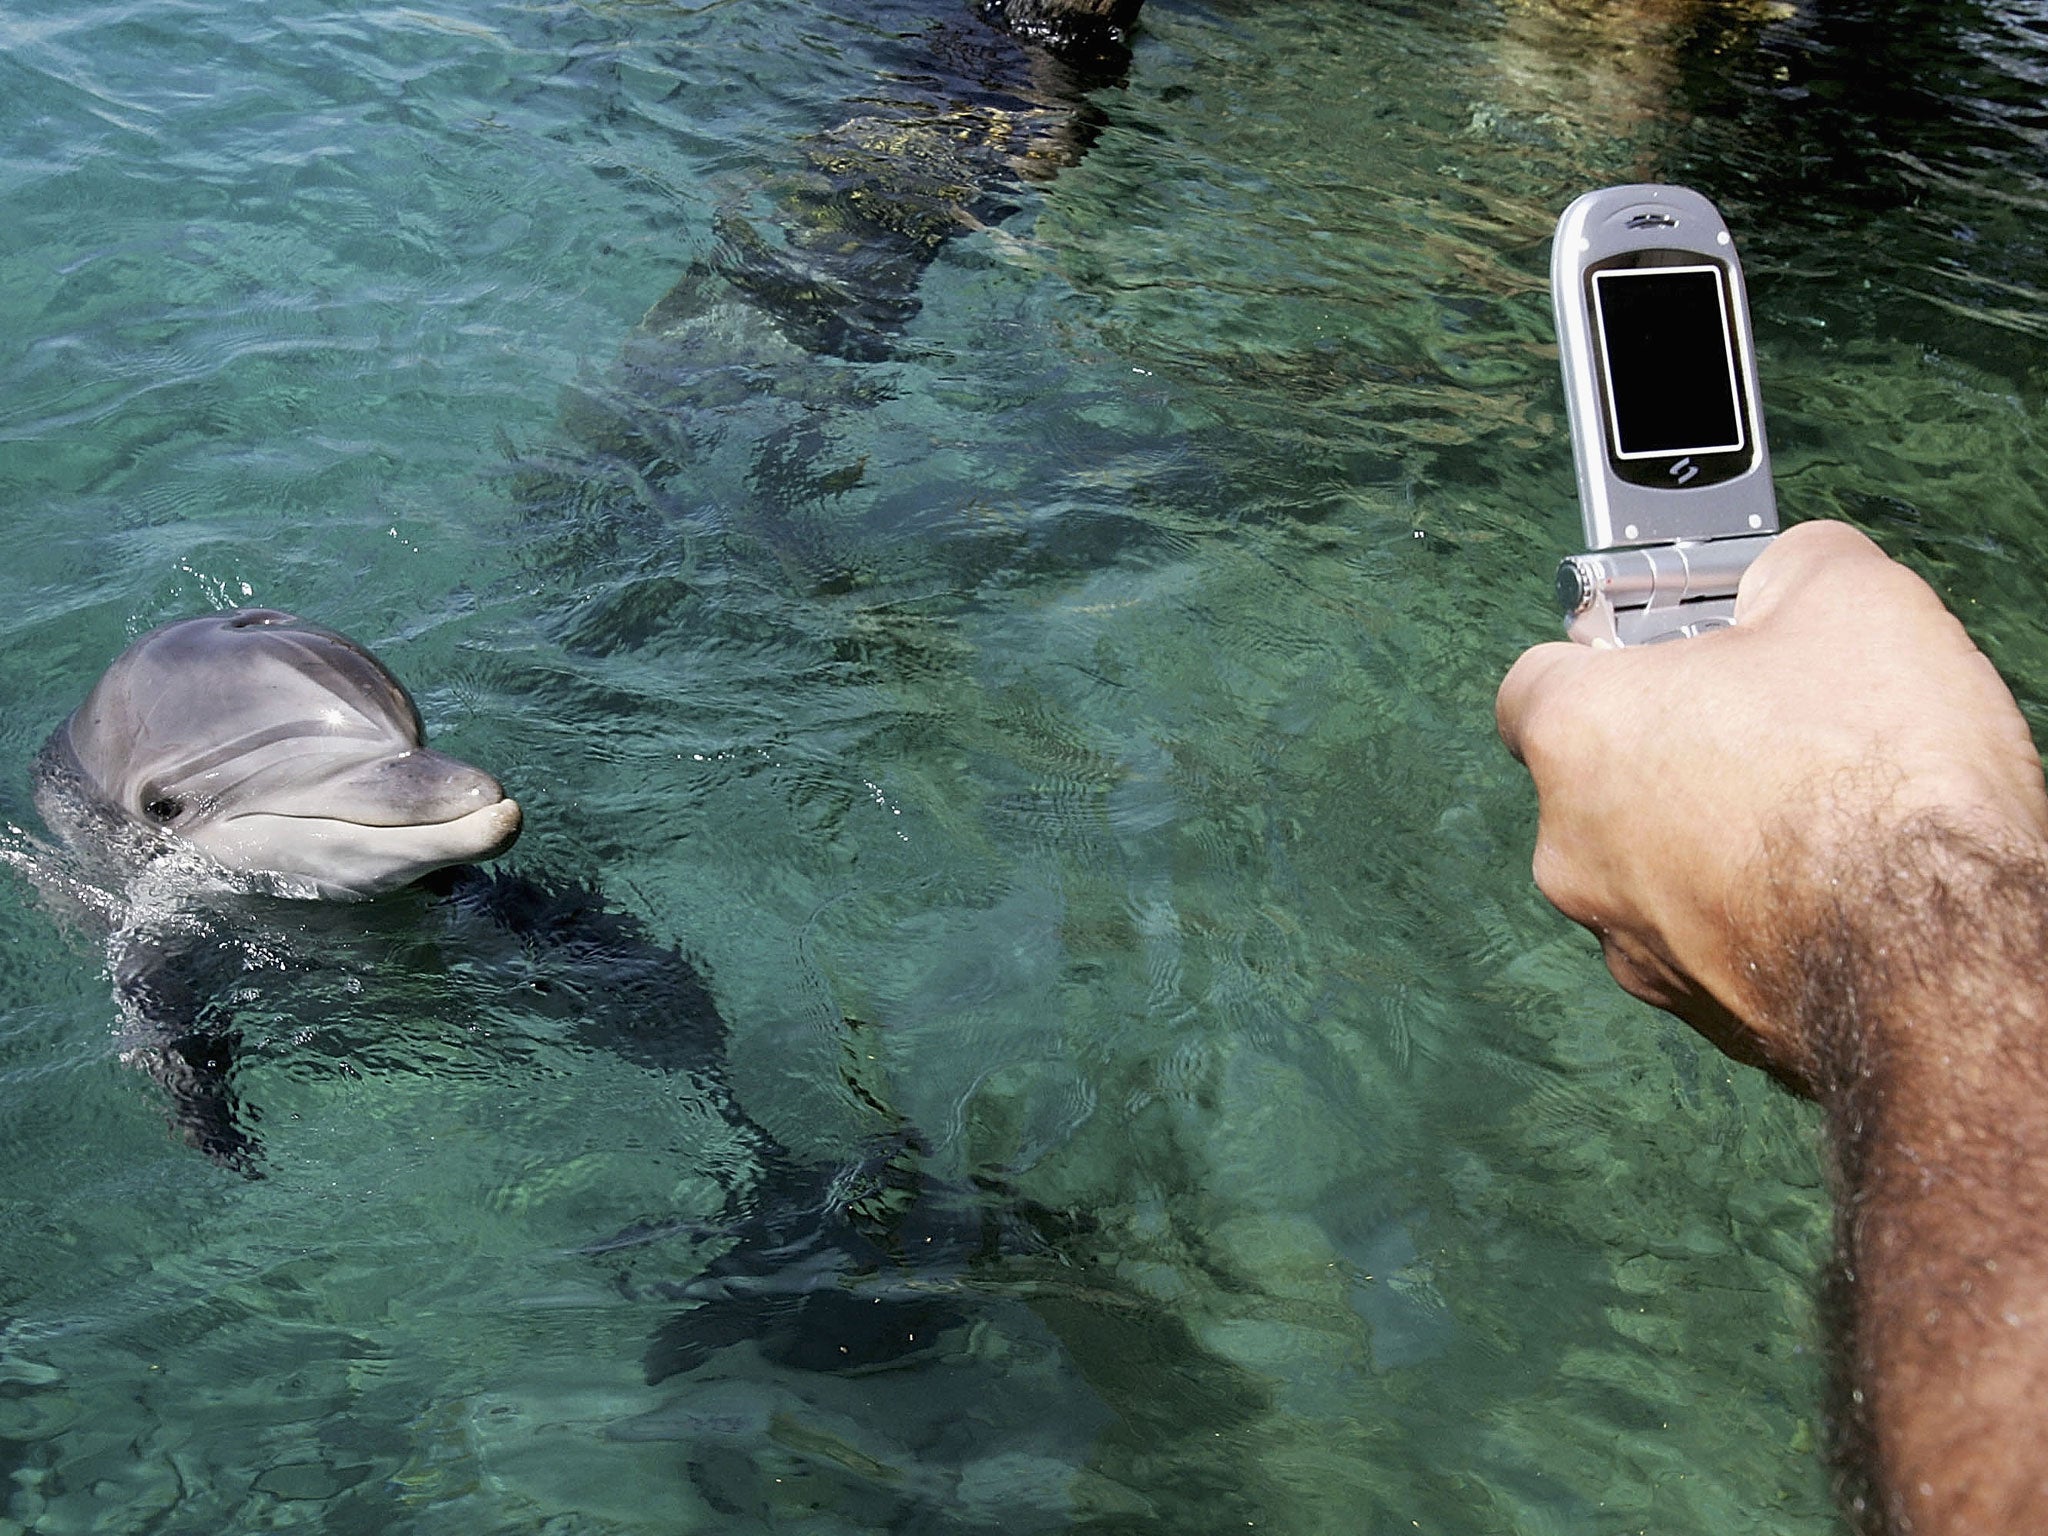 A visitor uses his cell phone camera to photograph a bottlenose dolphin at the Dolphin Reef center research center and attraction April 27, 2005 in the Israeli Red Sea resort of Eilat.